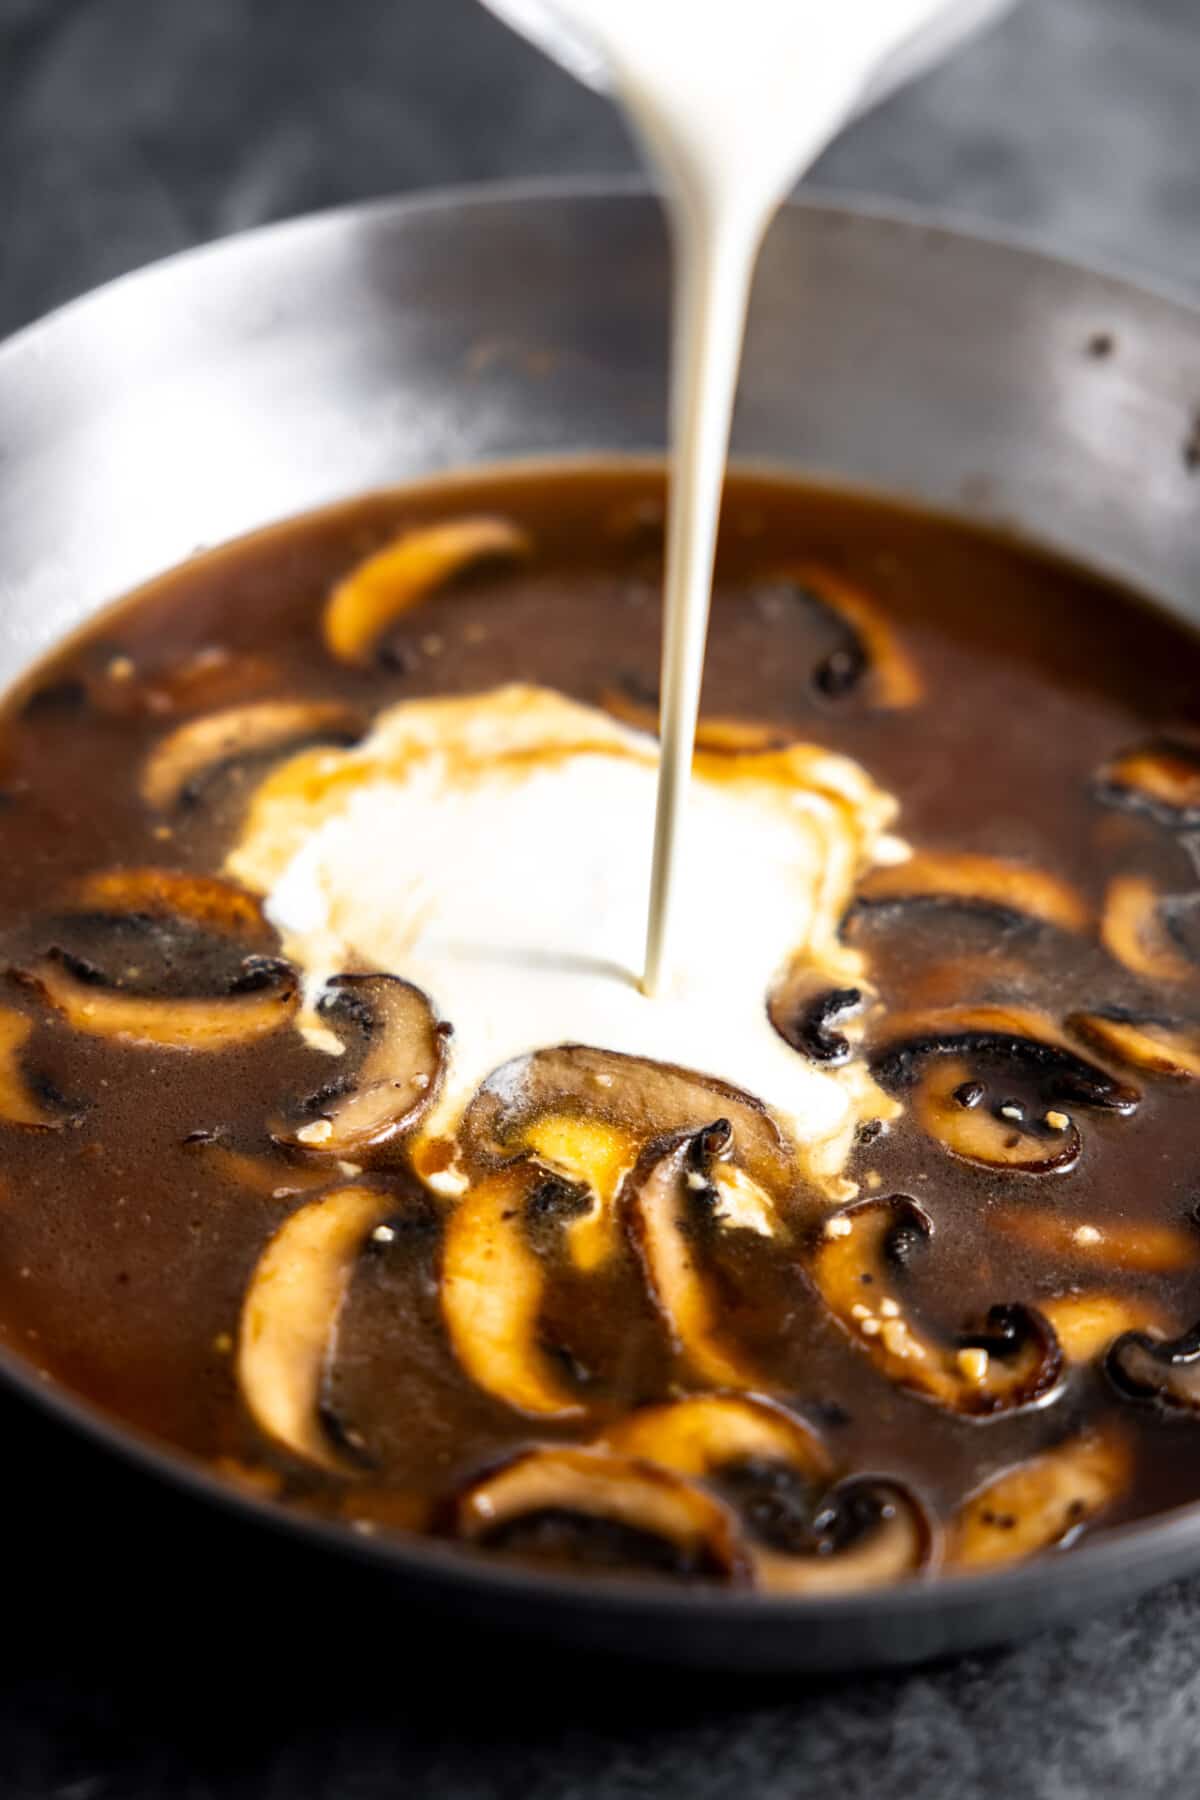 Cream pouring into skillet with a mushroom sauce.